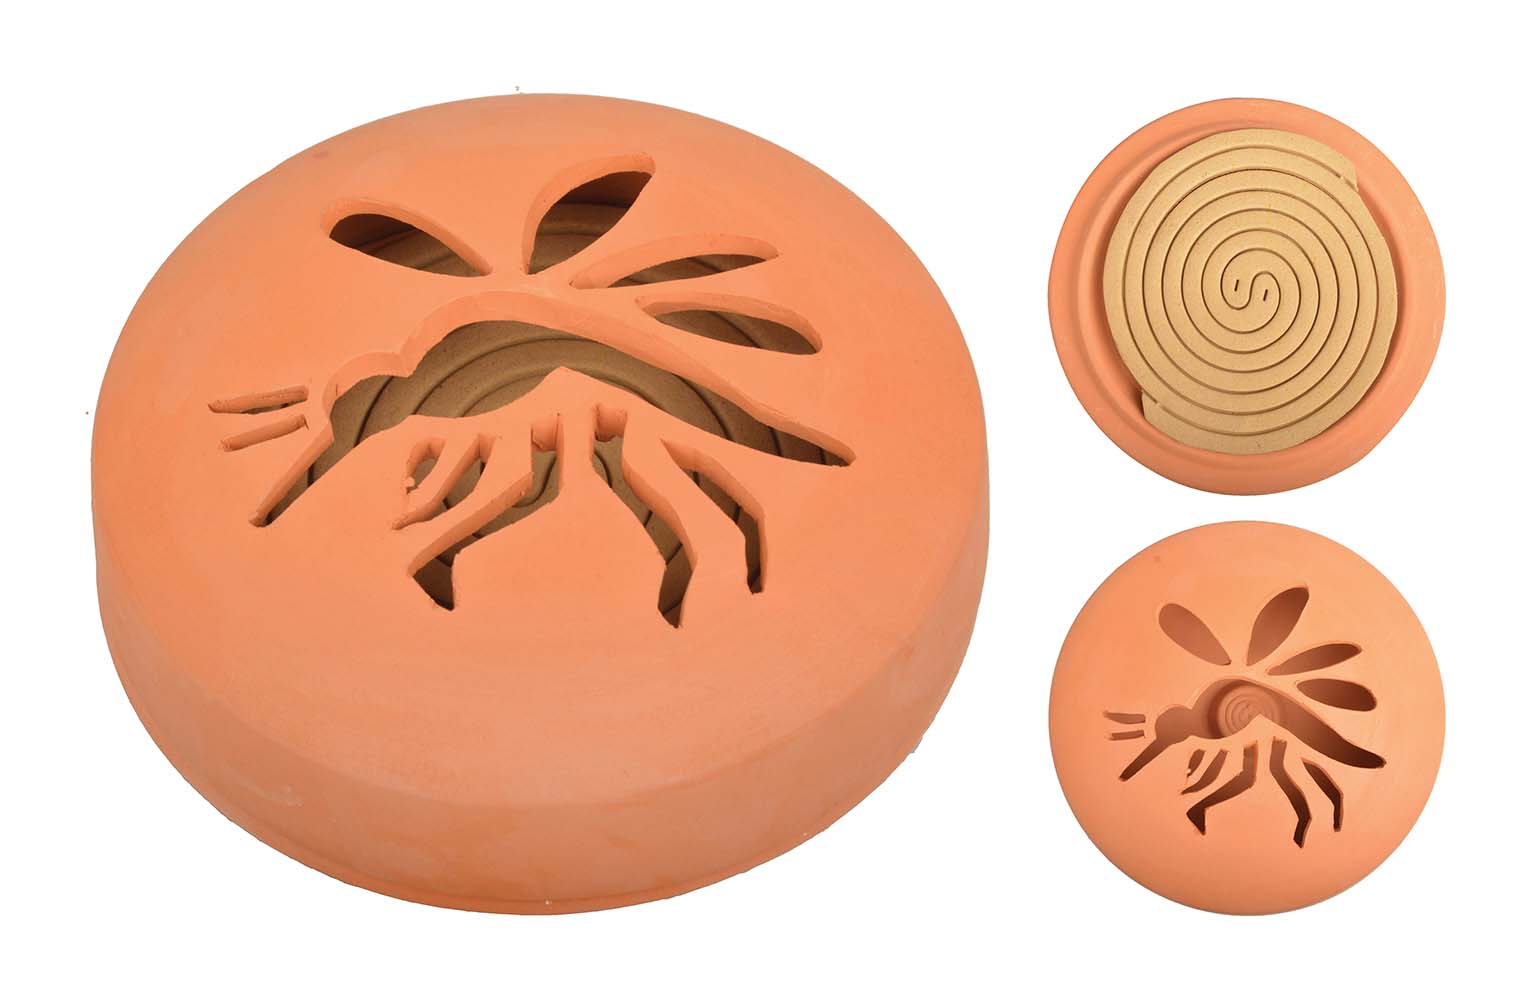 8208110 Clever spirals against insects. The spirals disperse an odour that keeps insects at bay. The spirals are nature-friendly and animal-friendly. A set consists of a terracotta holder and ten citronella spirals.